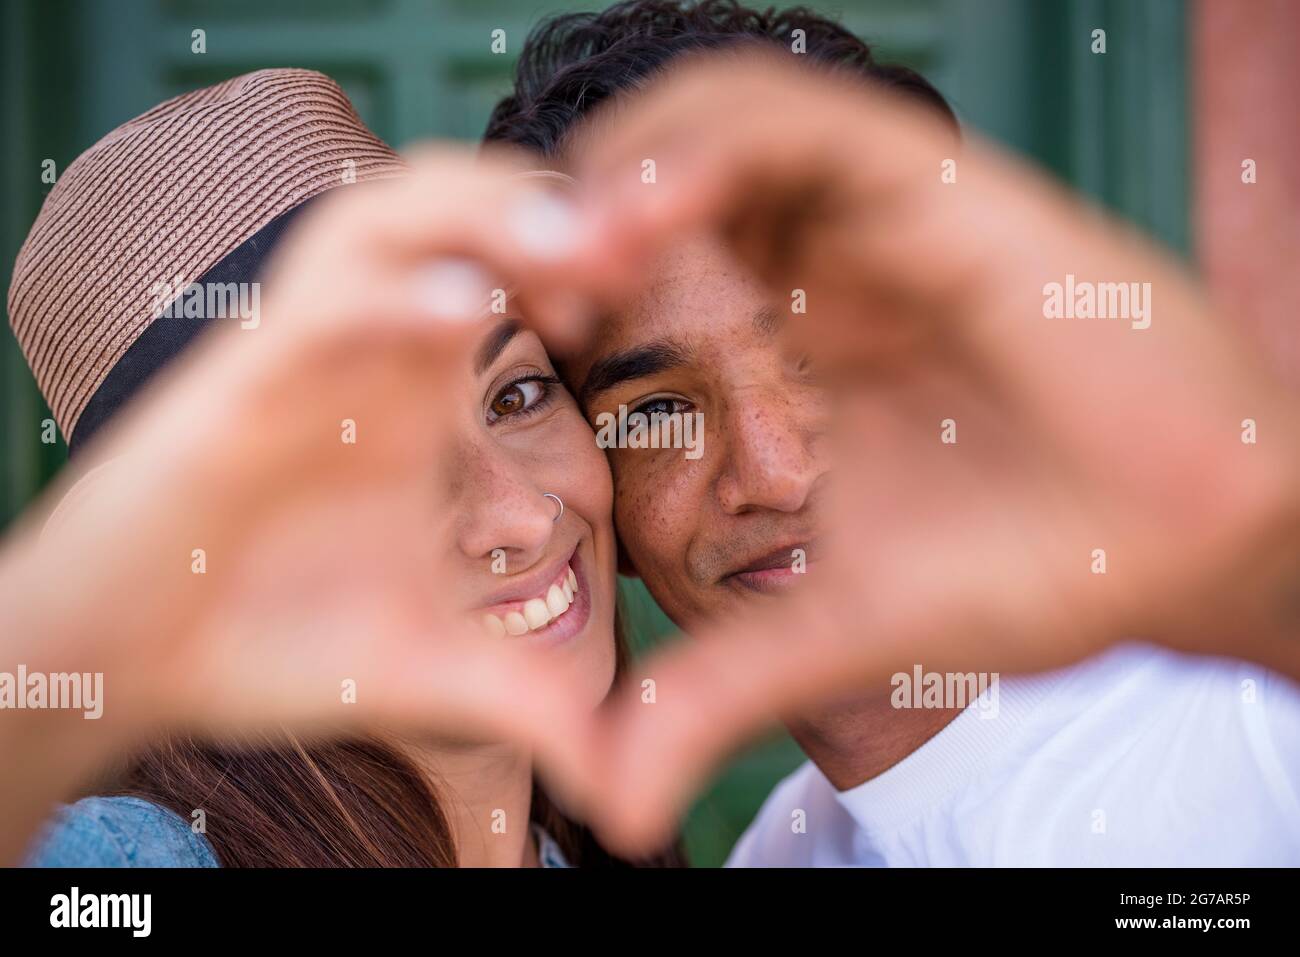 Mixed race couple do hearth sign with hands, looking to camera - love and relationship concept with young man and woman - boyfriend girlfriend together - friendship millennial boy and girl Stock Photo